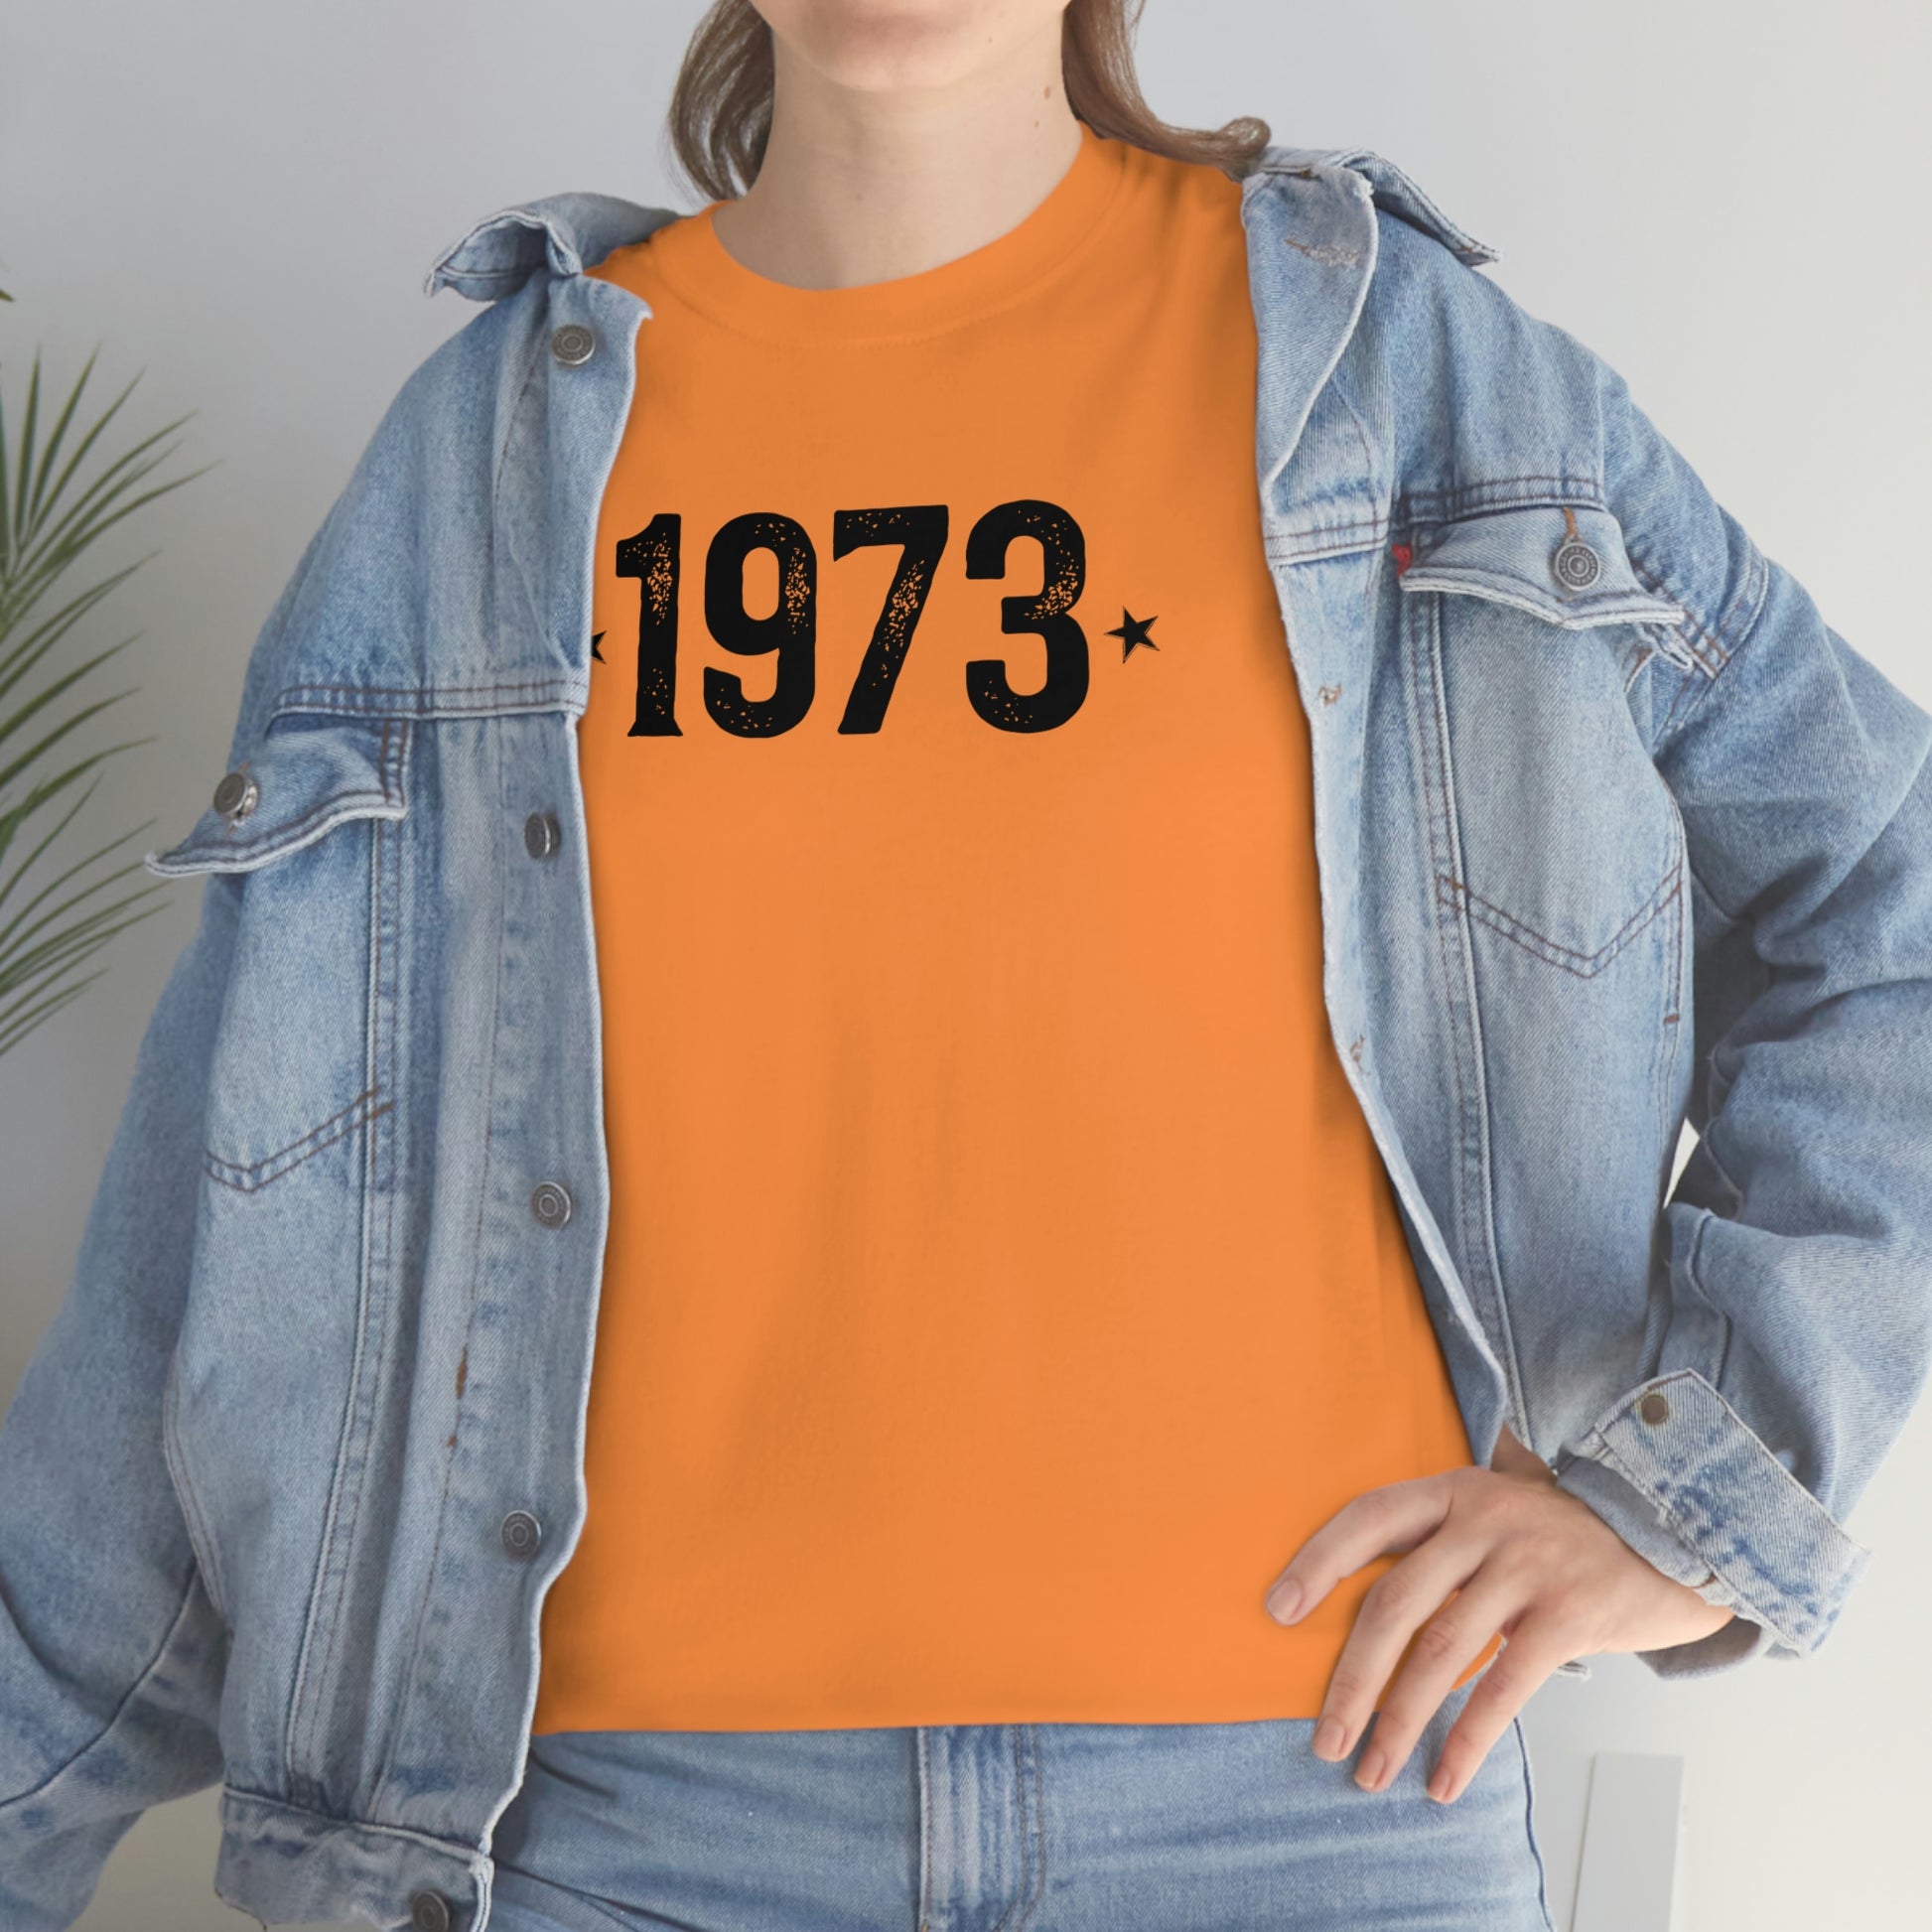 "1973 Birthday Year" T-Shirt - Weave Got Gifts - Unique Gifts You Won’t Find Anywhere Else!